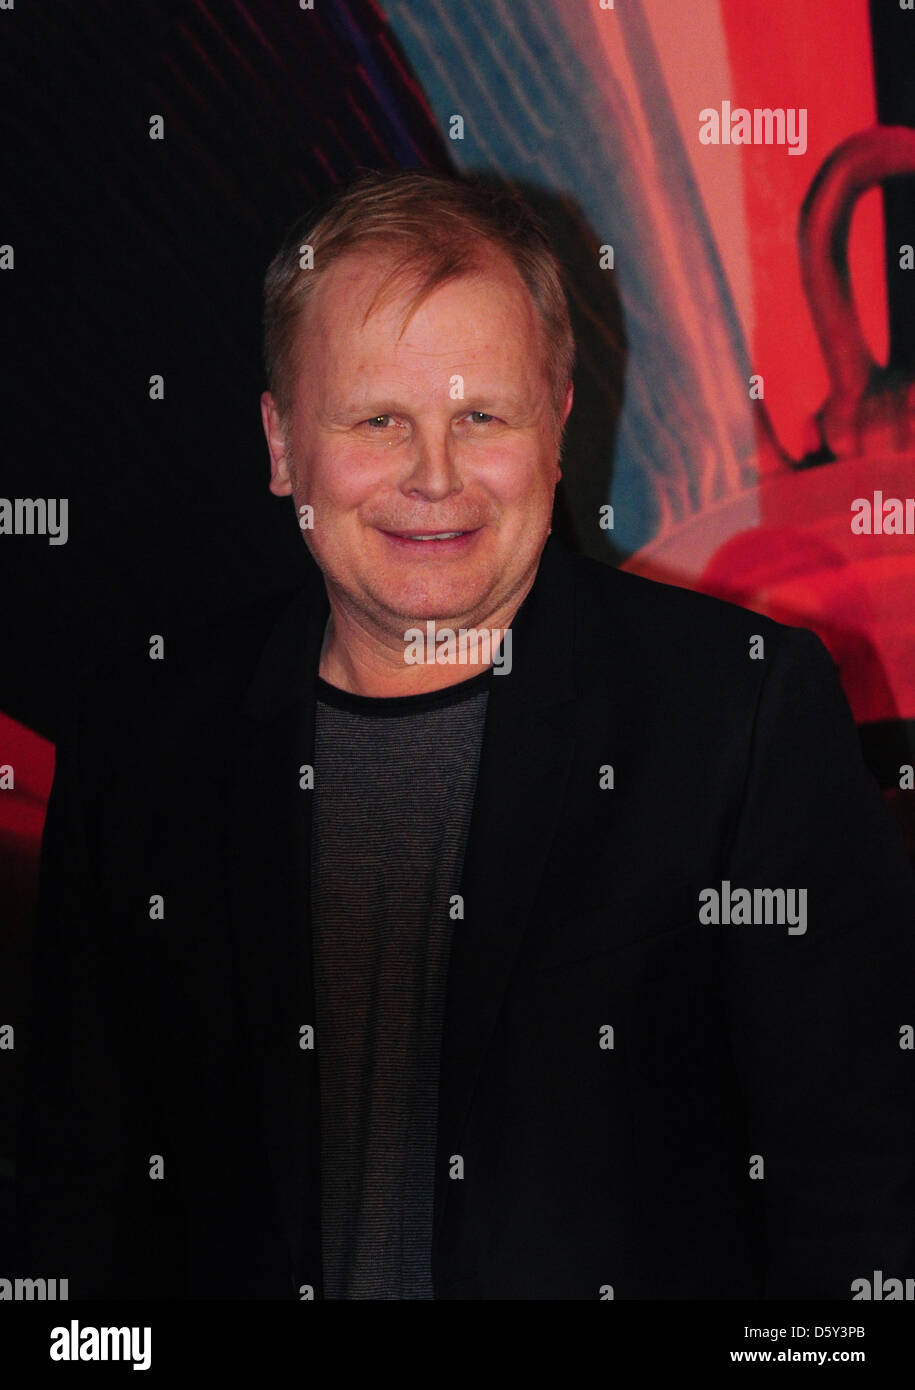 Herbert Groenemeyer at a press conference and photo call to promote his new album 'Schiffsverkehr' at Haus der Kulturen. Stock Photo